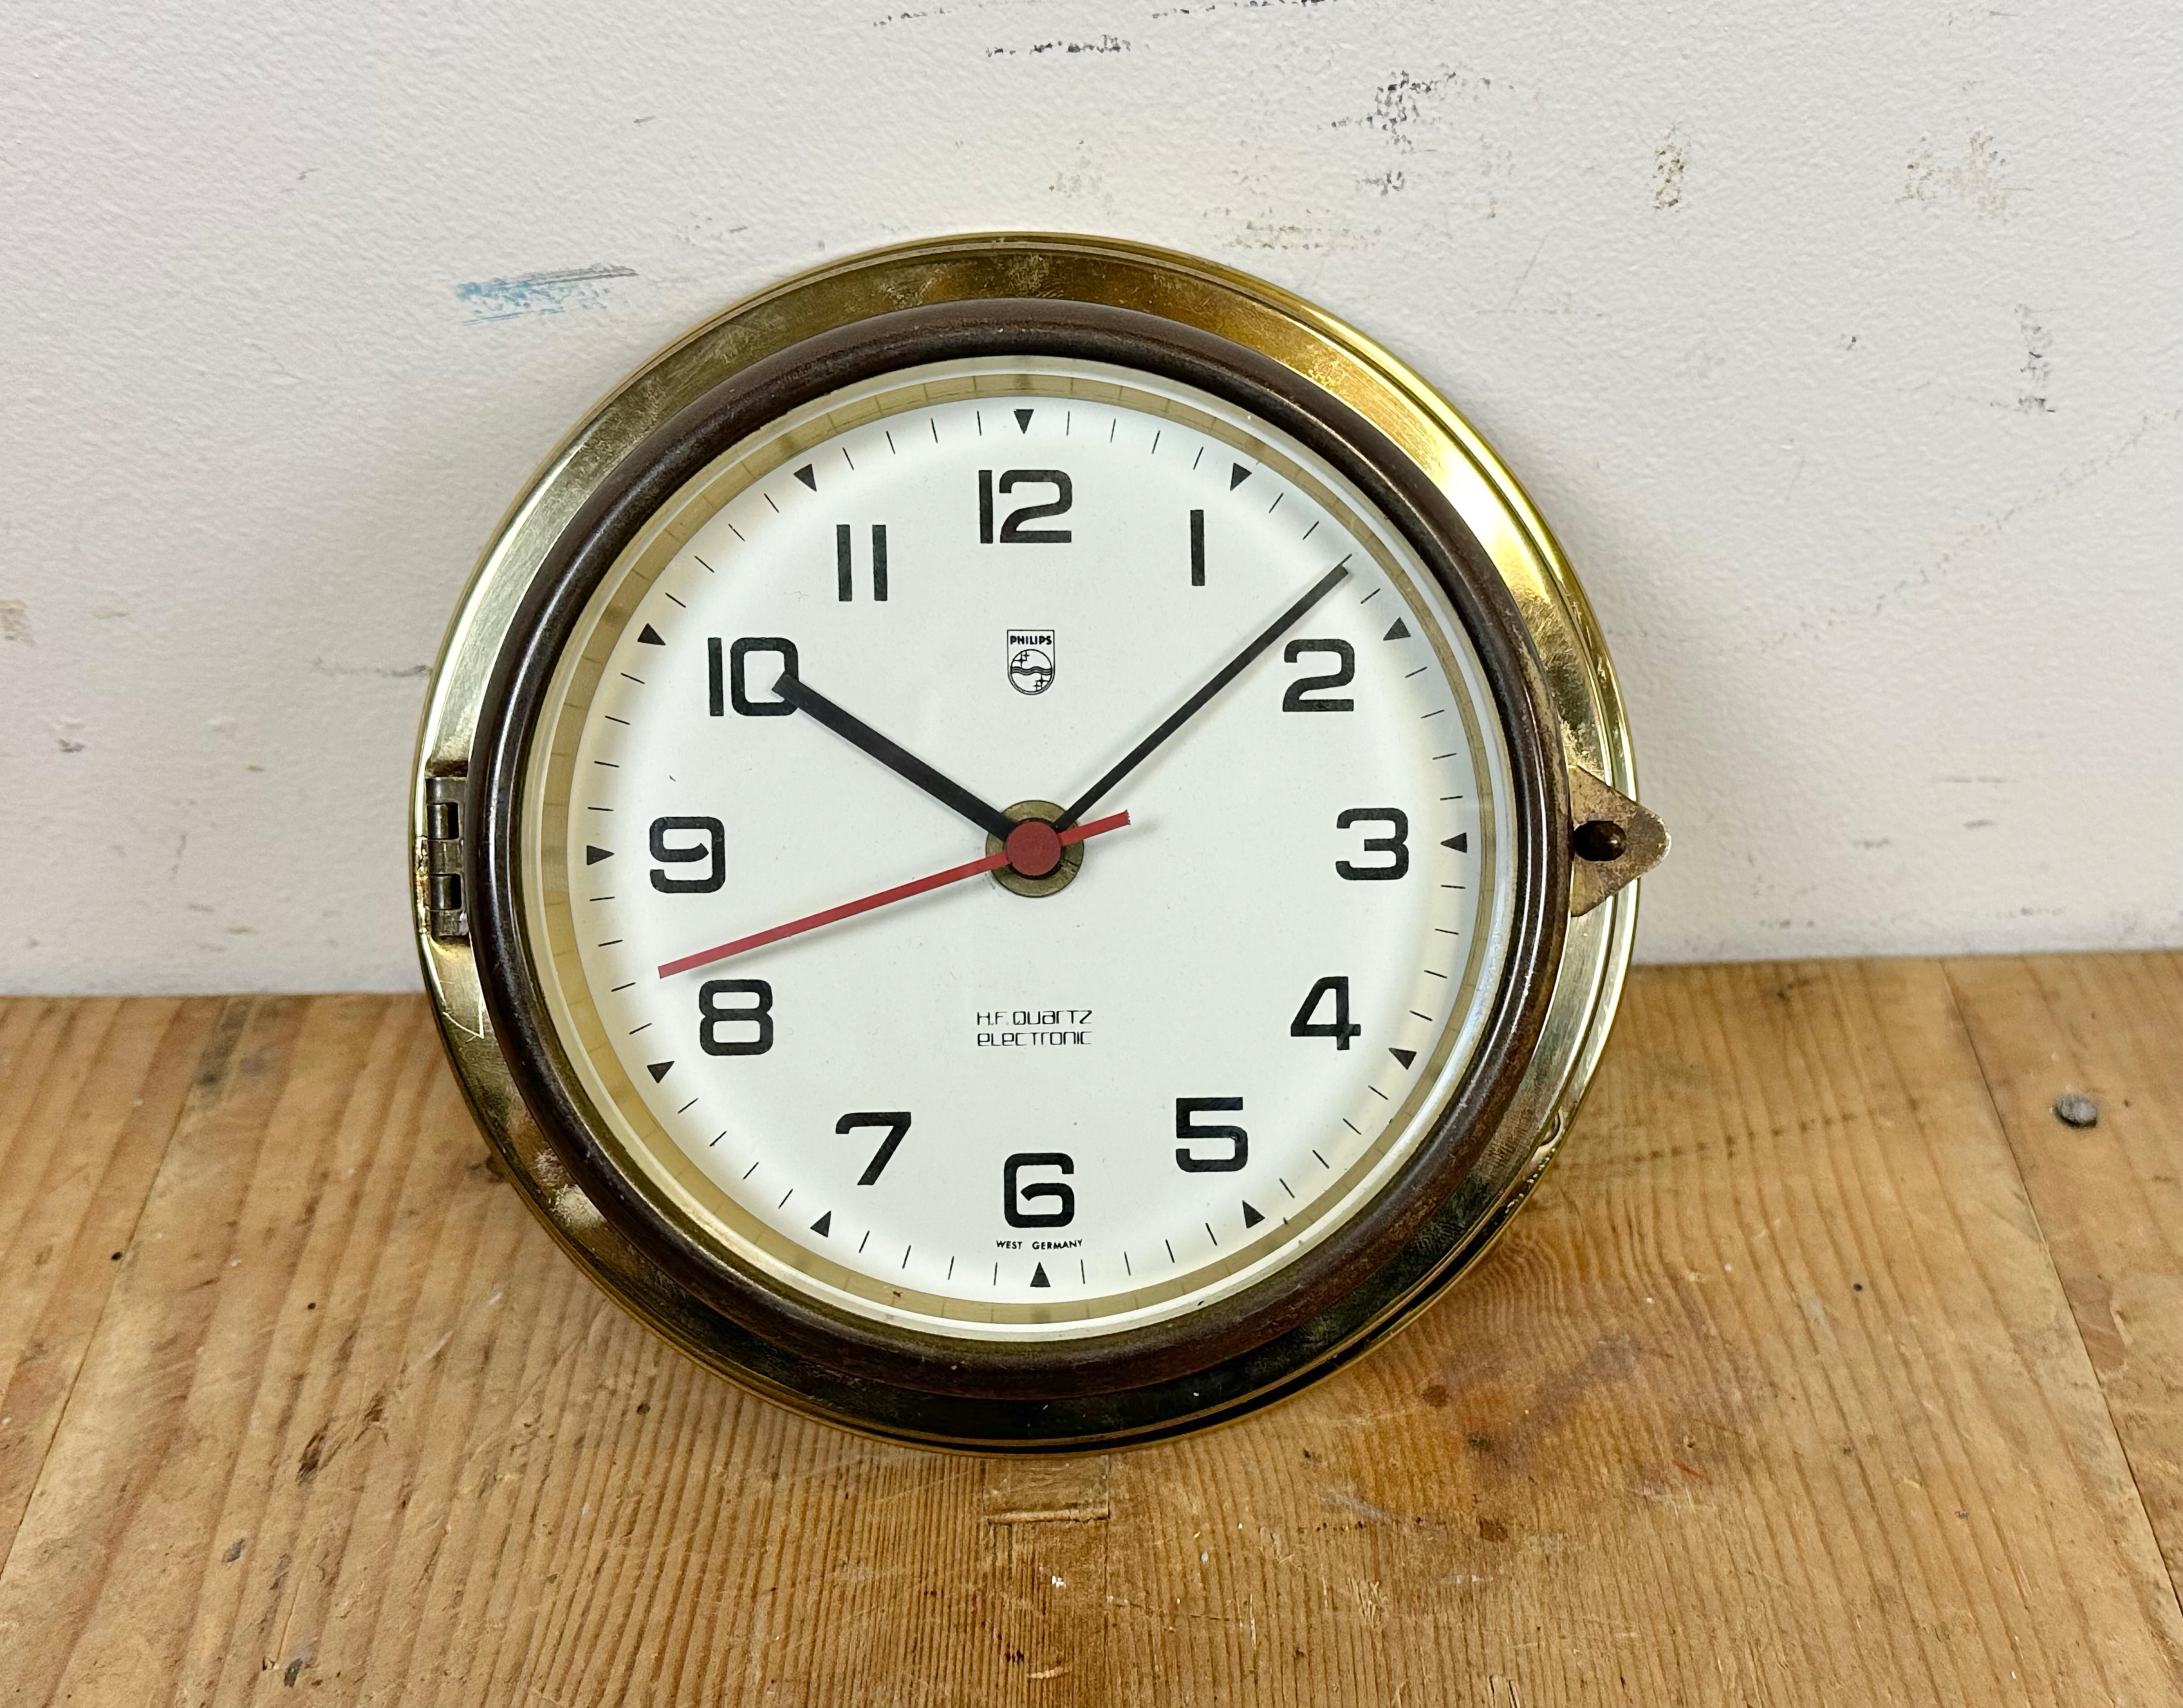 Vintage ship clock made by Philips in West Germany during the 1970s.It features a brass body frame and clear glass cover. This item has been converted into a battery-powered clockwork and works on just 1 x AA battery.
The weight of the clock is 0,6